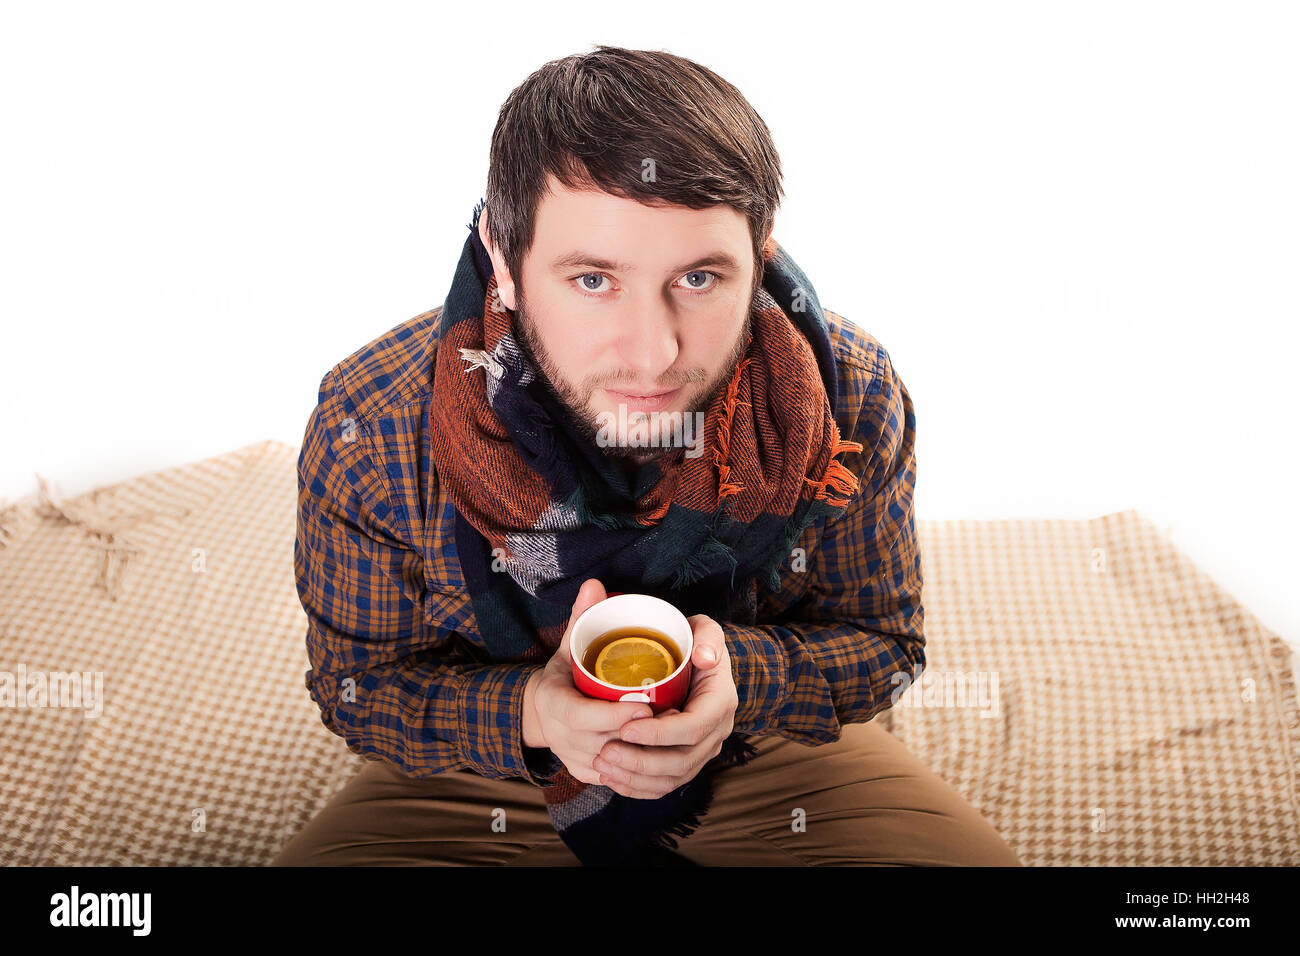 Portrait of a sick man with a fever wrapped in a blanket and holding a warm tea cup Stock Photo